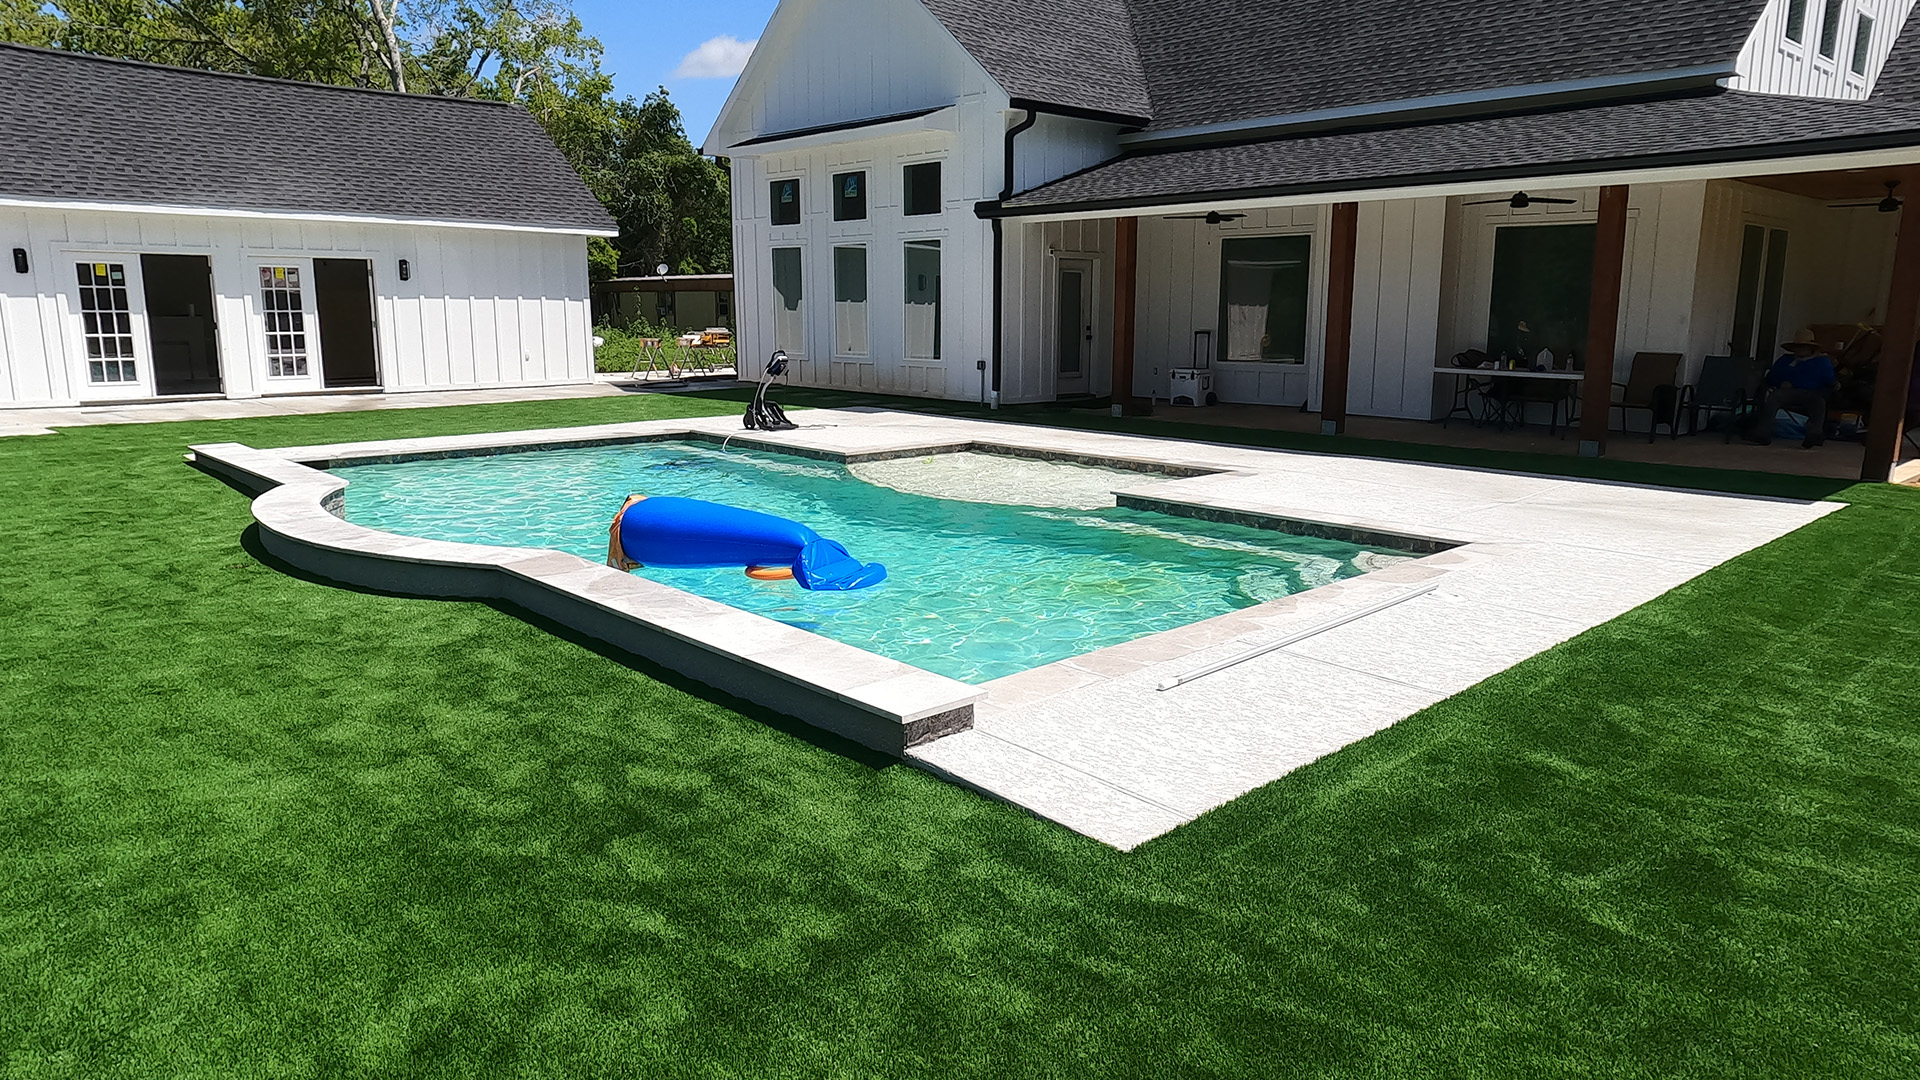 Artificial Turf pool decking installation cost upkeep